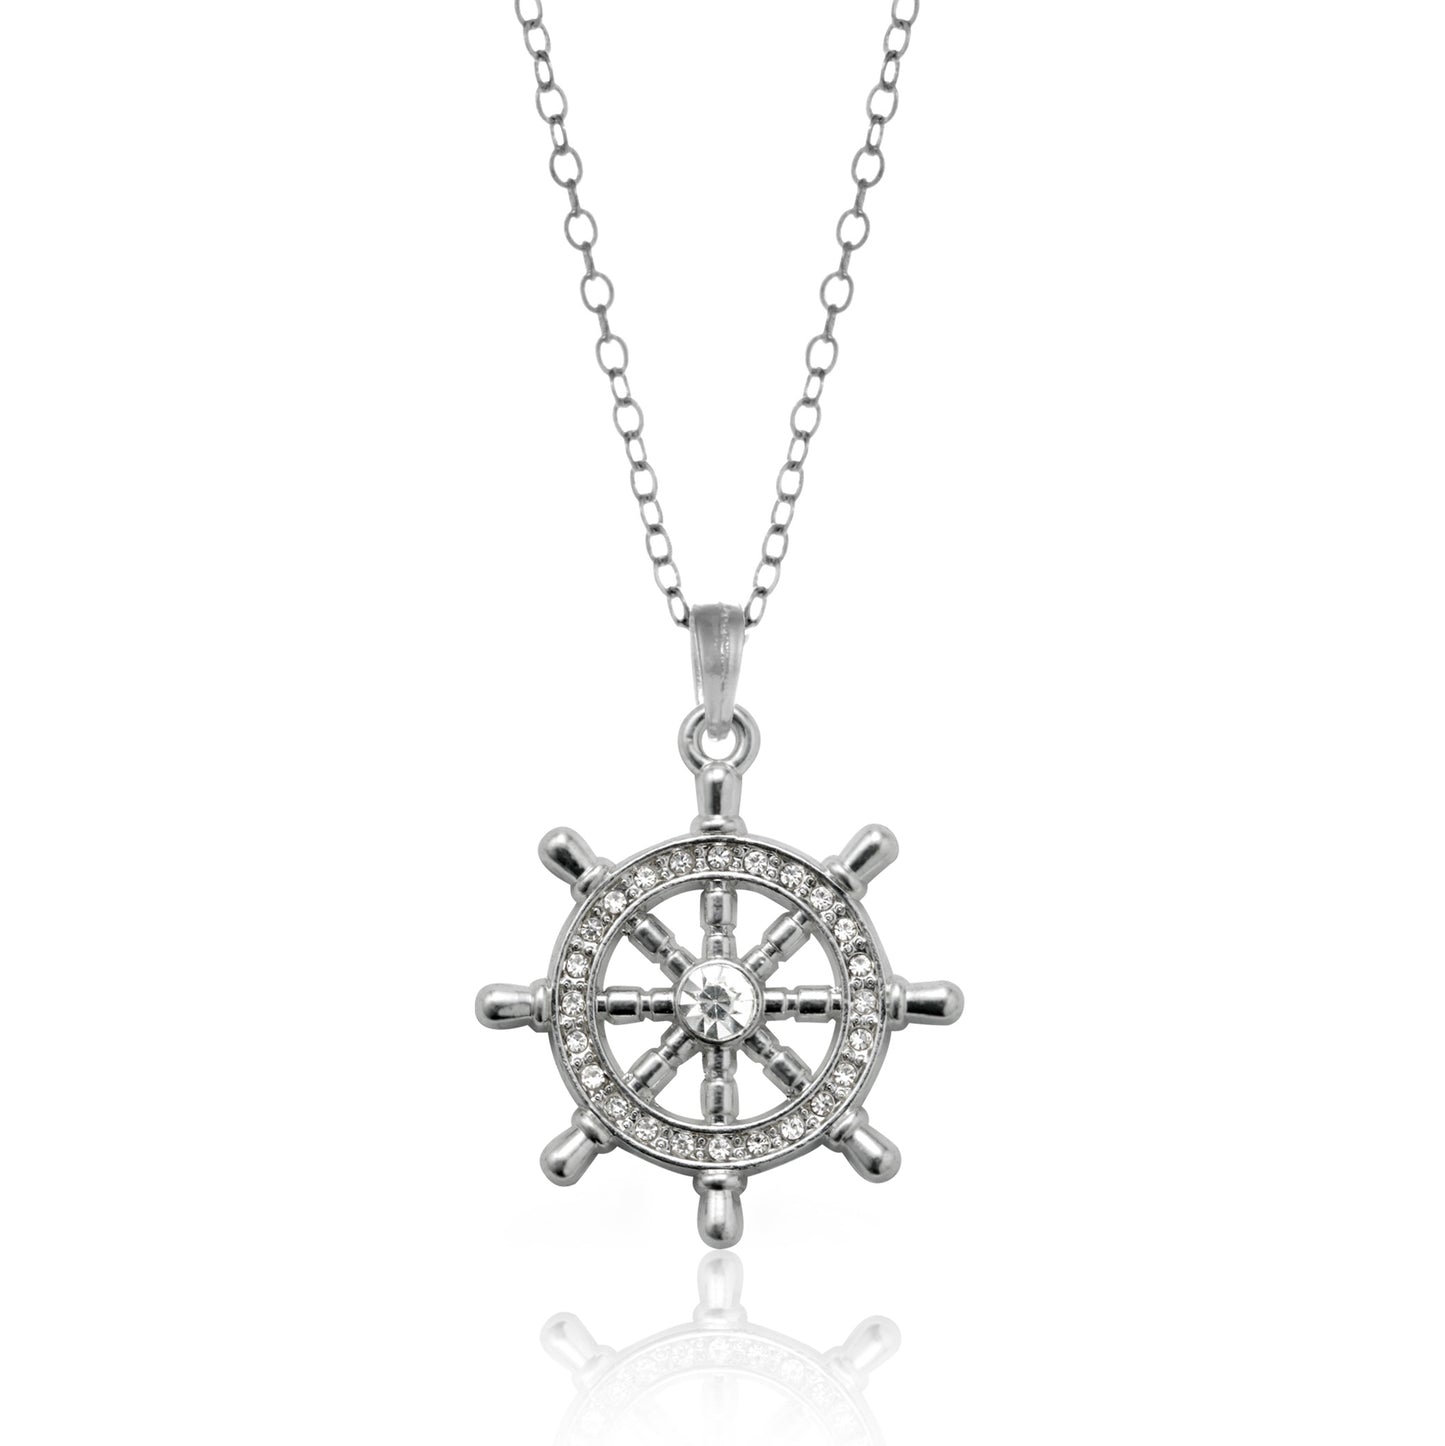 Silver Nautical Charm Classic Necklace